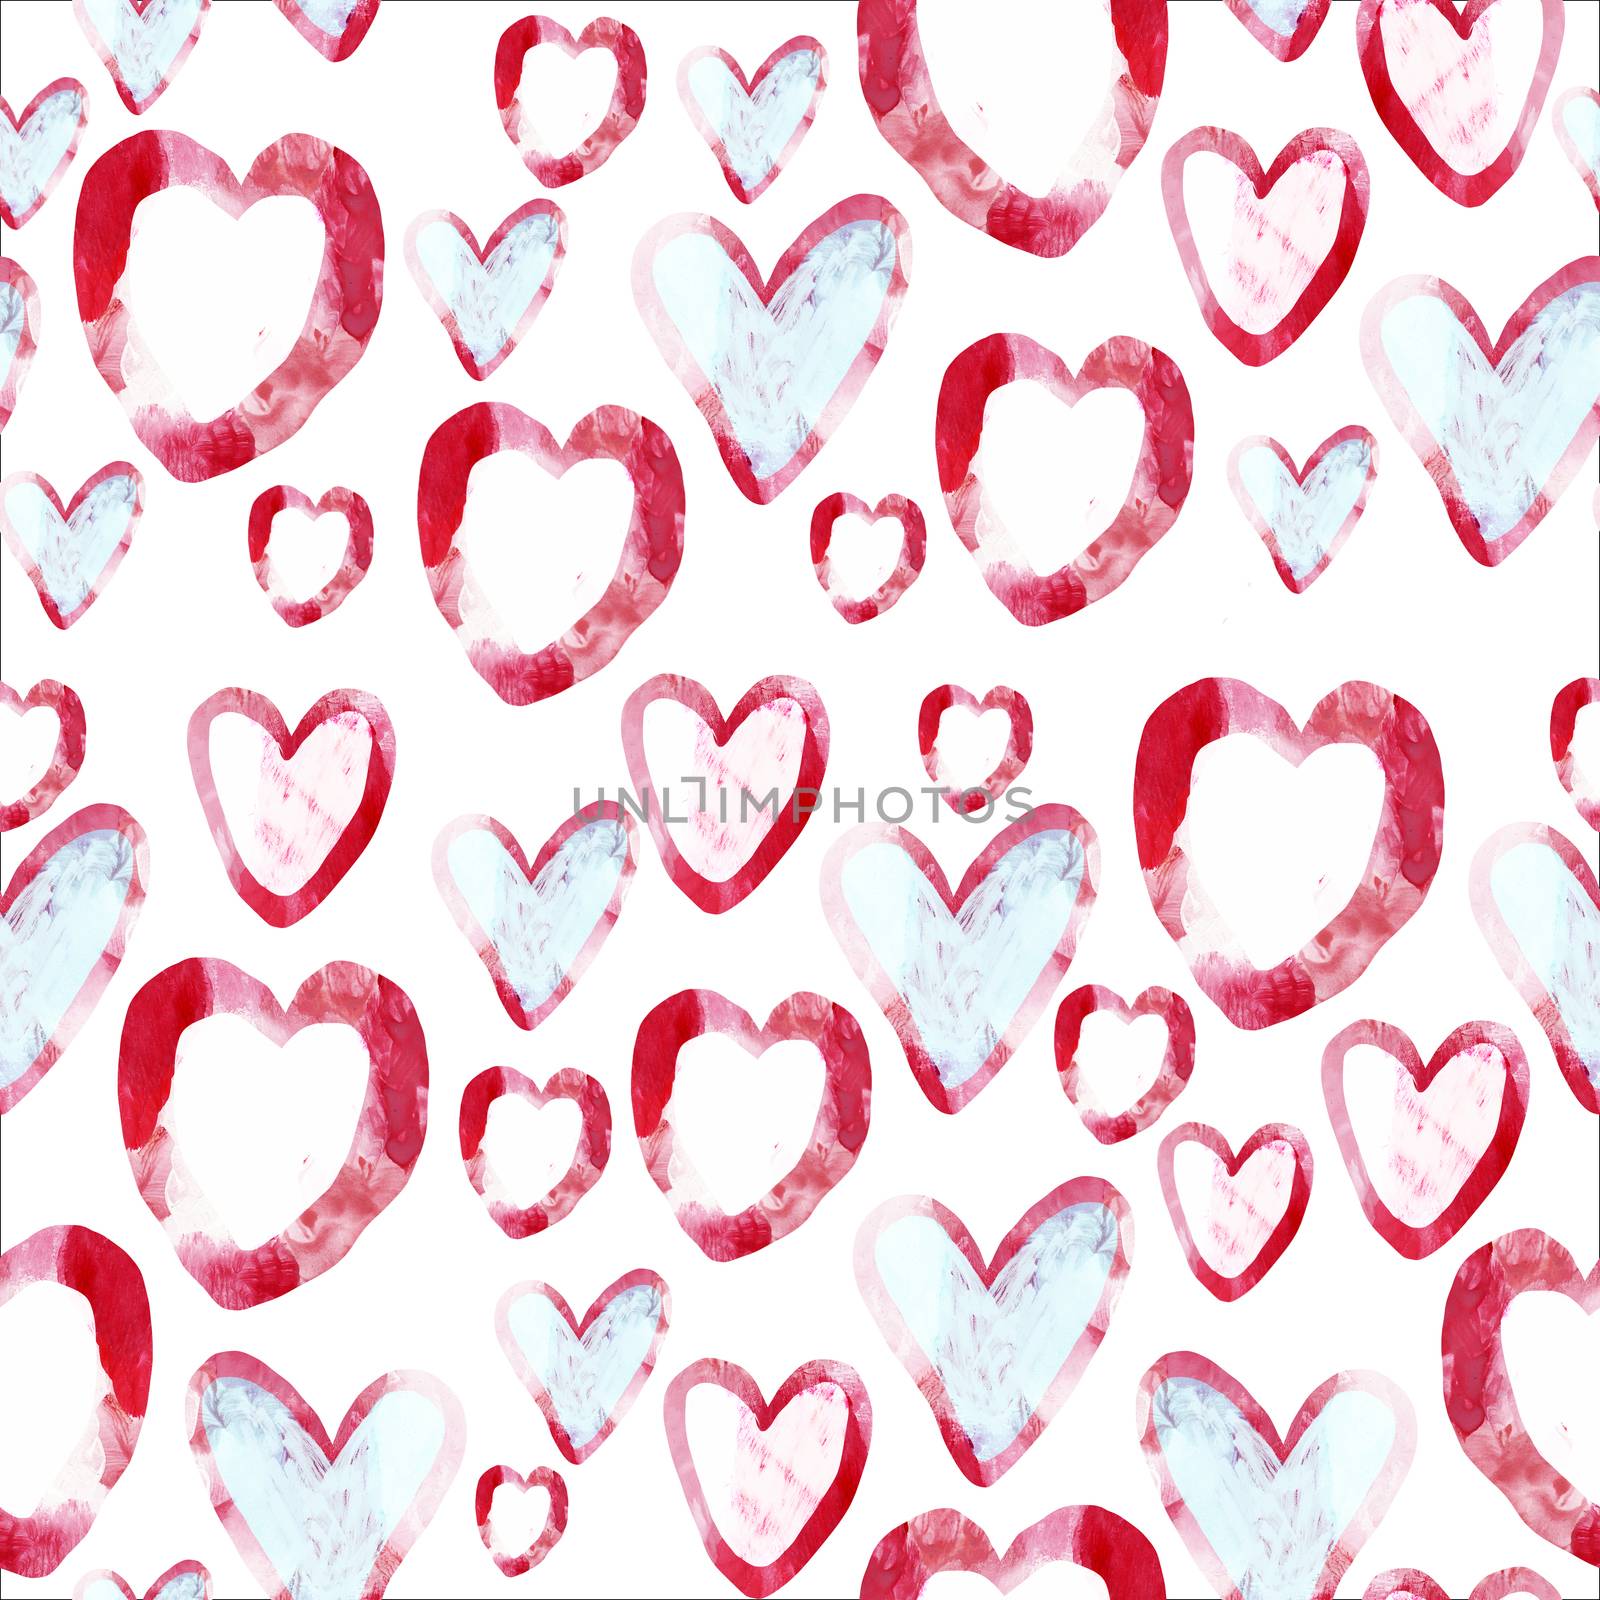 Pink heart endless romantic pattern. Colorful hearts on white background. Design emplate for postcards, print, poster, party, Valentine's day, textile.